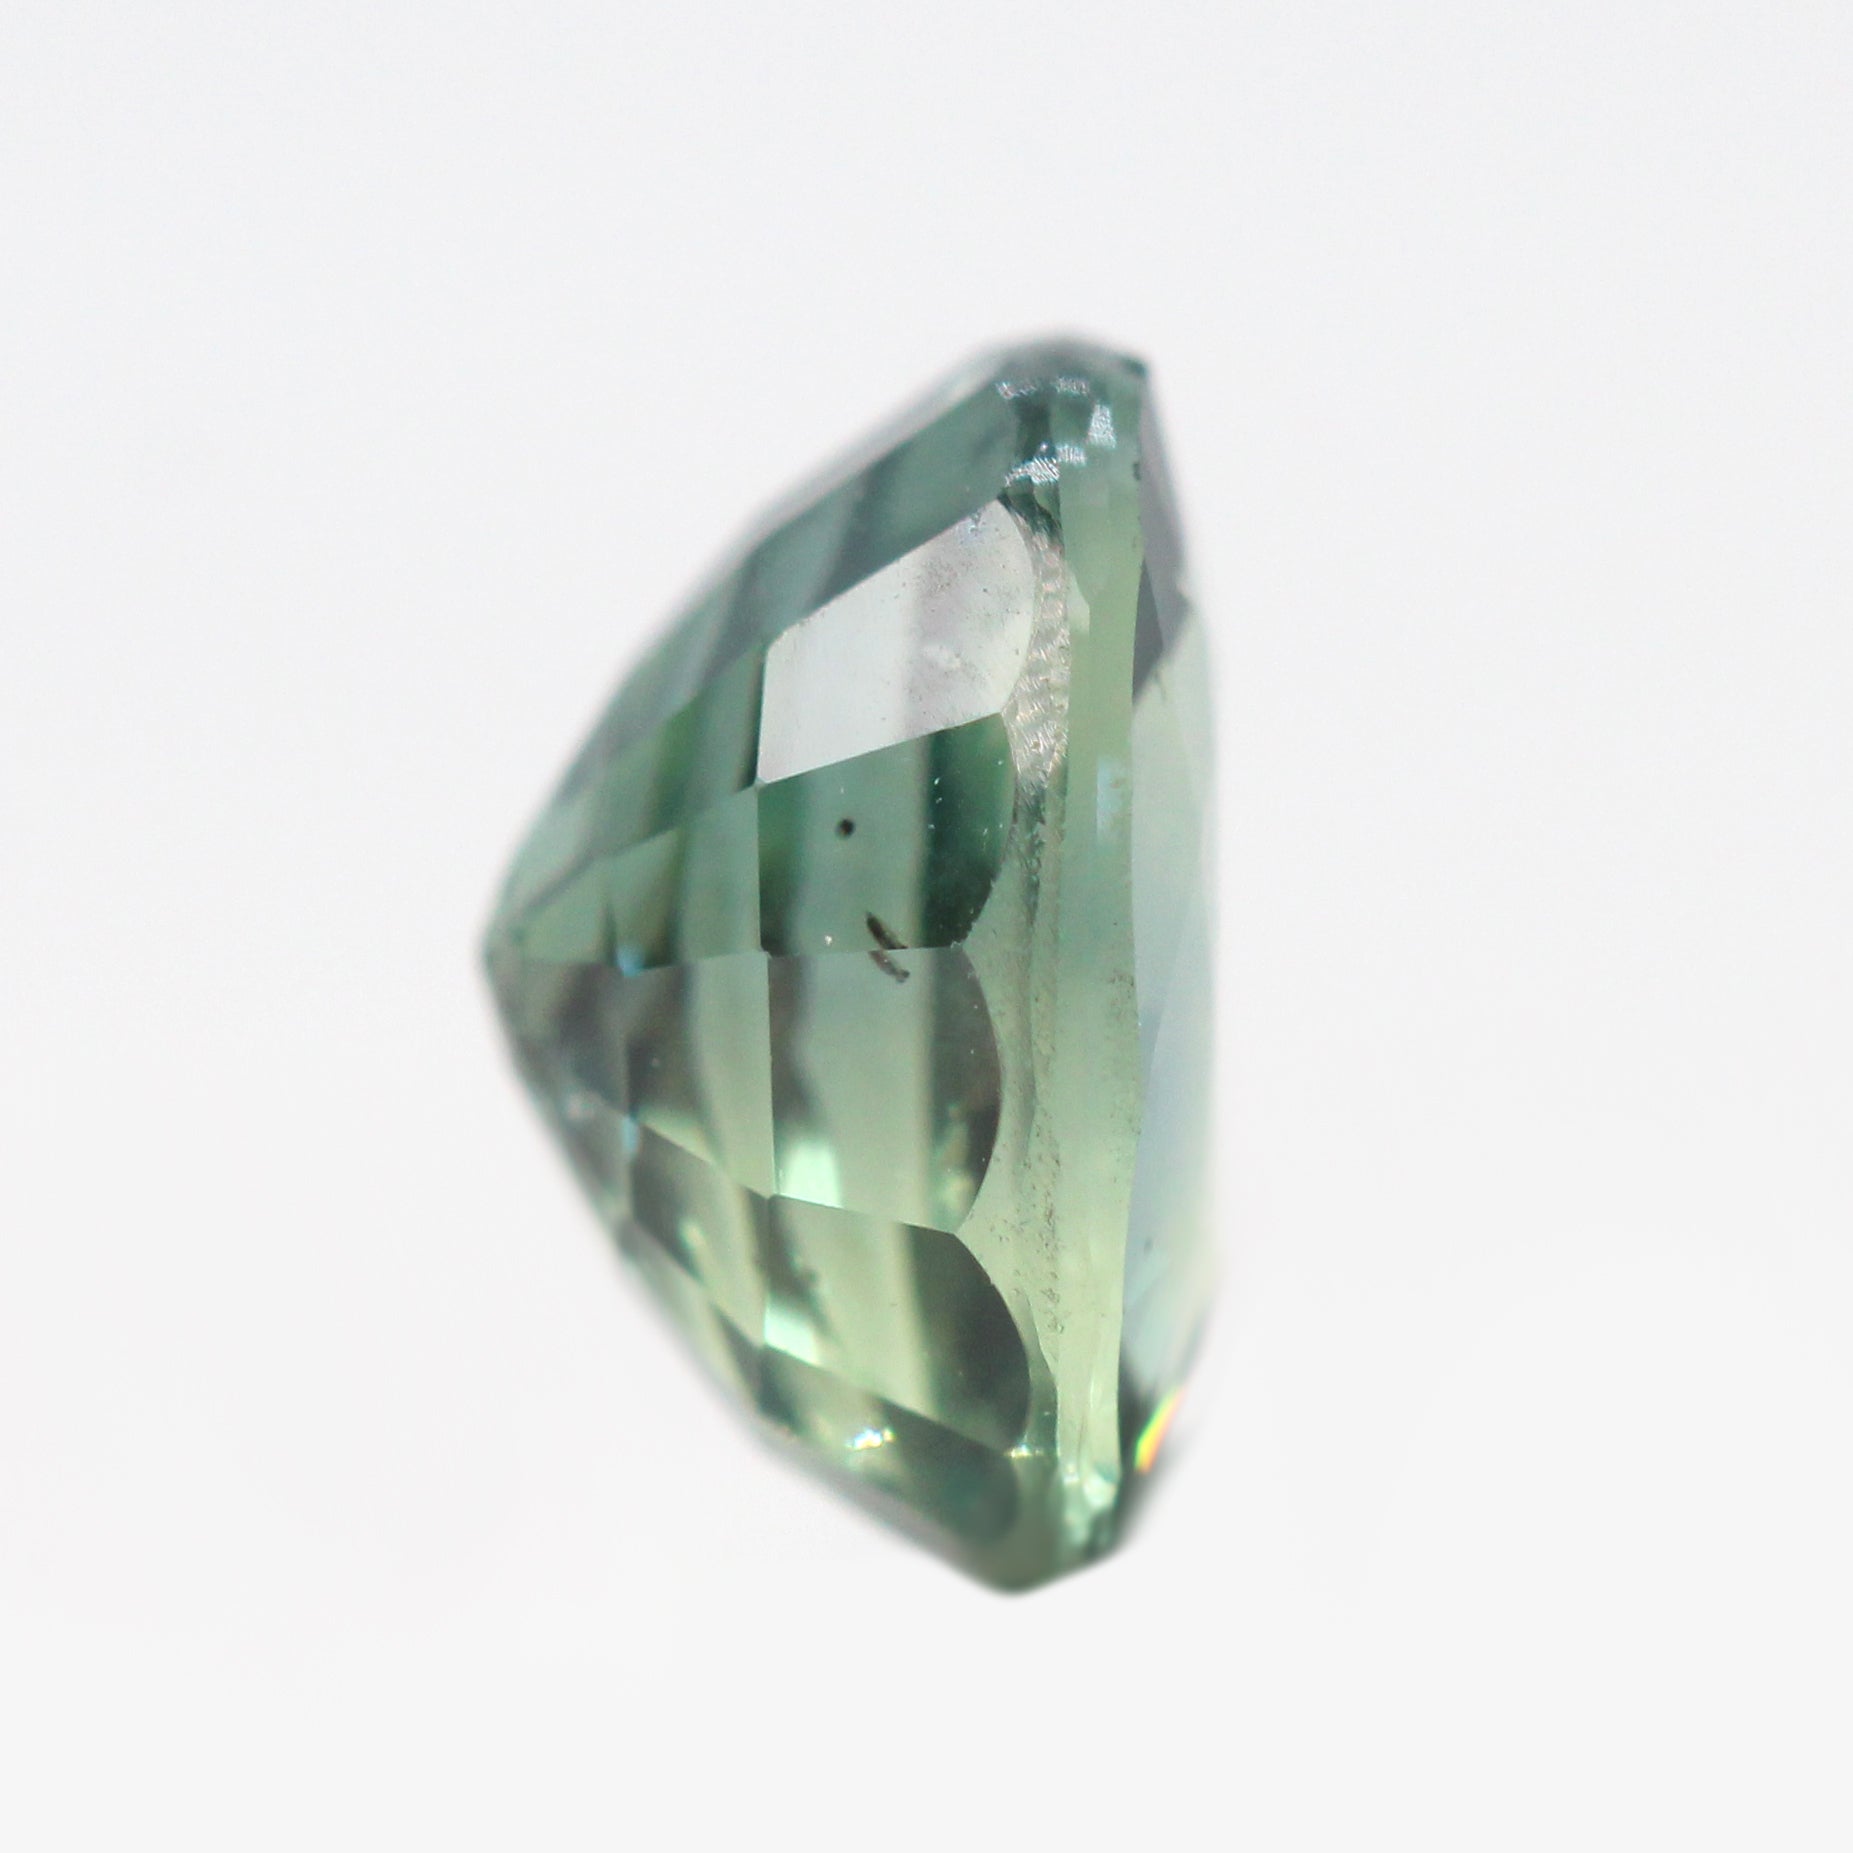 1.55 Carat Light Teal Green Oval Madagascar Sapphire for Custom Work - Inventory Code TGOS155 - Midwinter Co. Alternative Bridal Rings and Modern Fine Jewelry